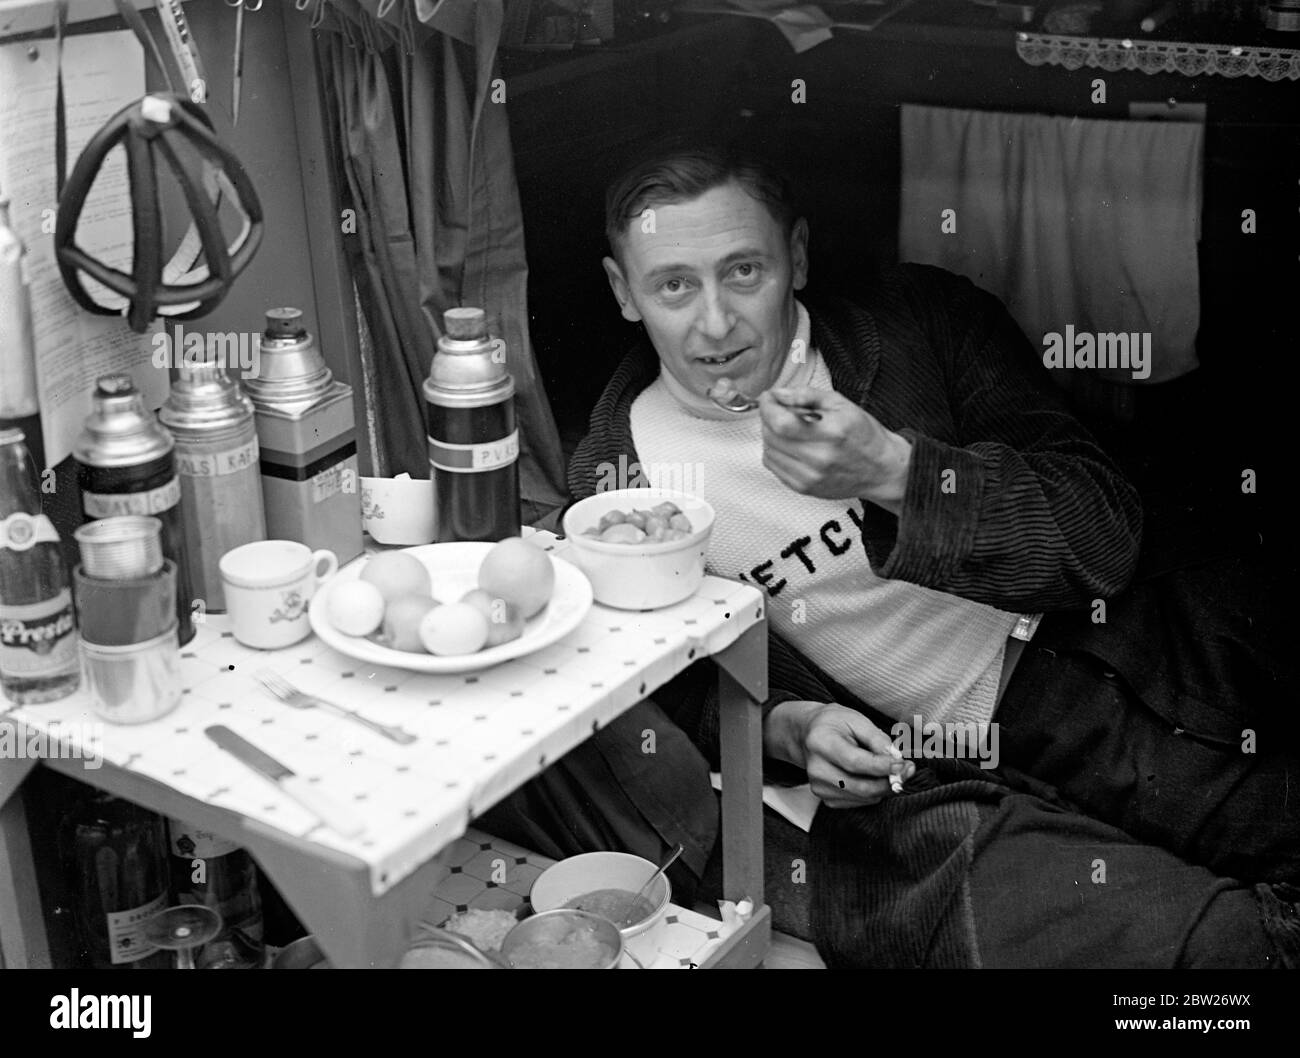 Breakfast in bed at six-day cycle race. The second six days cycle race is in progress at the Empire Pool, Wembley, London, having started a few minutes after midnight. Photo shows, J Collard, mechanic to the Dutch team, having breakfast in bed. 2 May 1938 Stock Photo